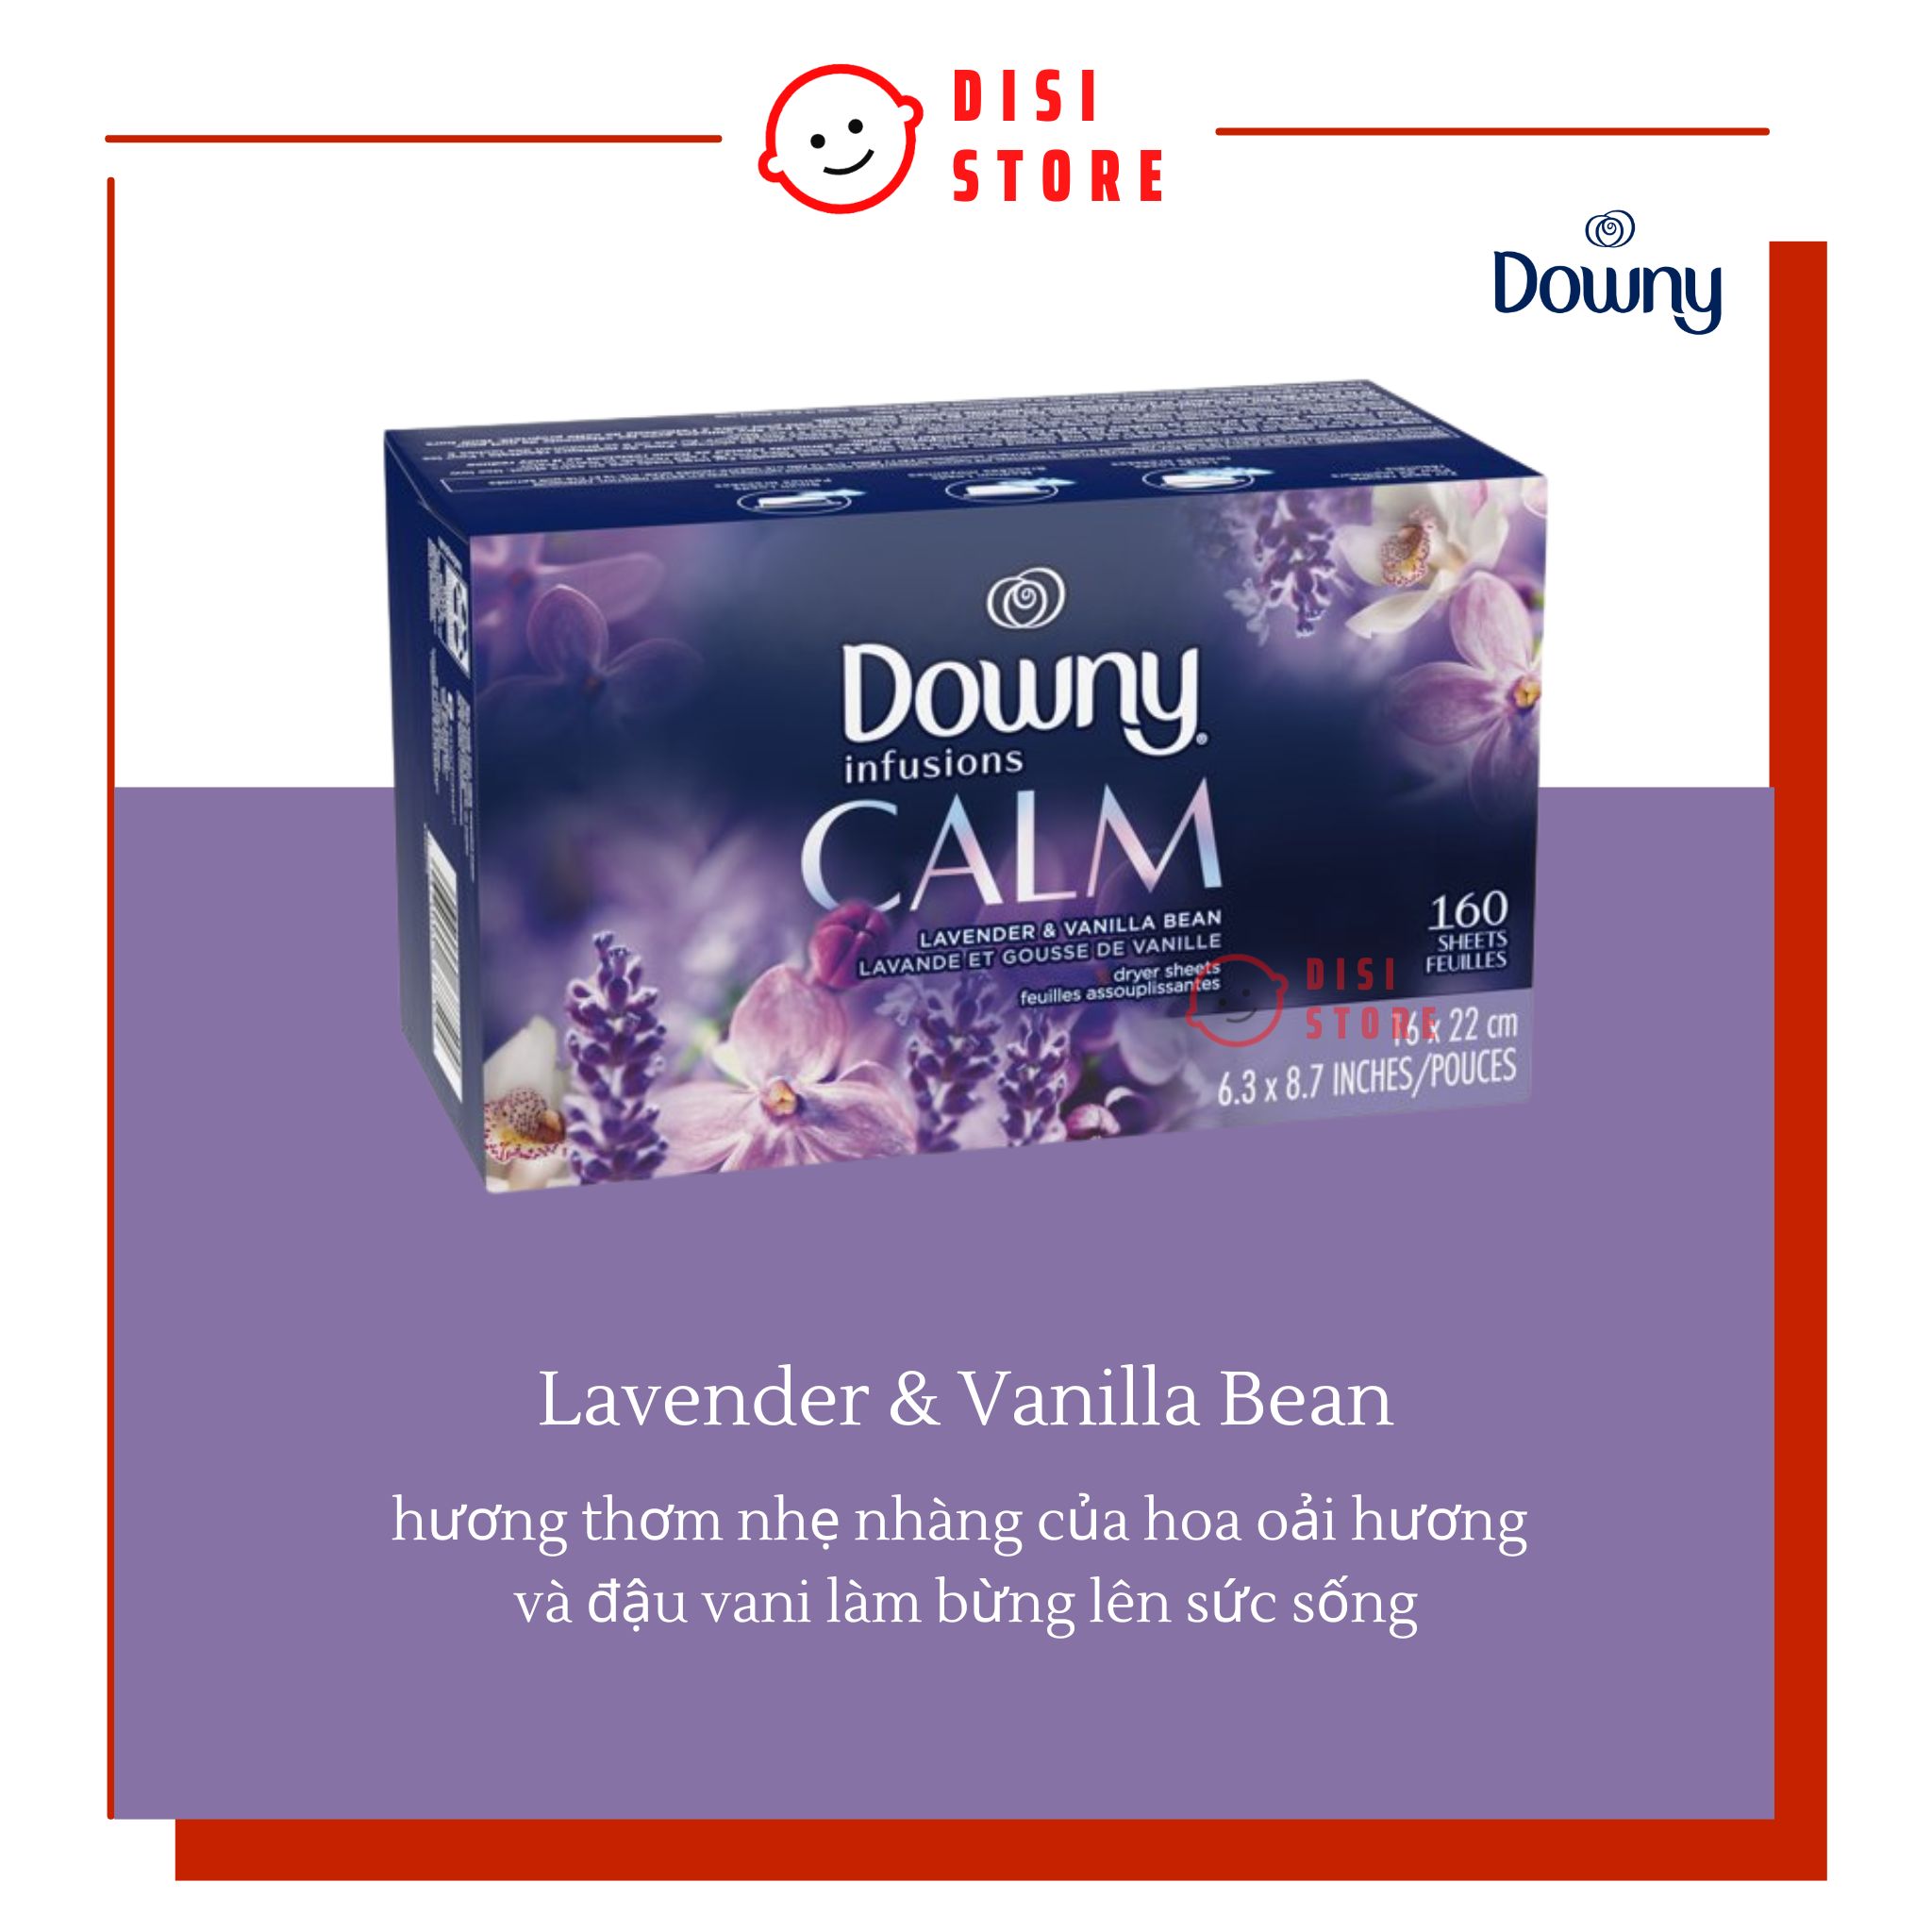 With box downy infusies calm lavender and vanilla bean American